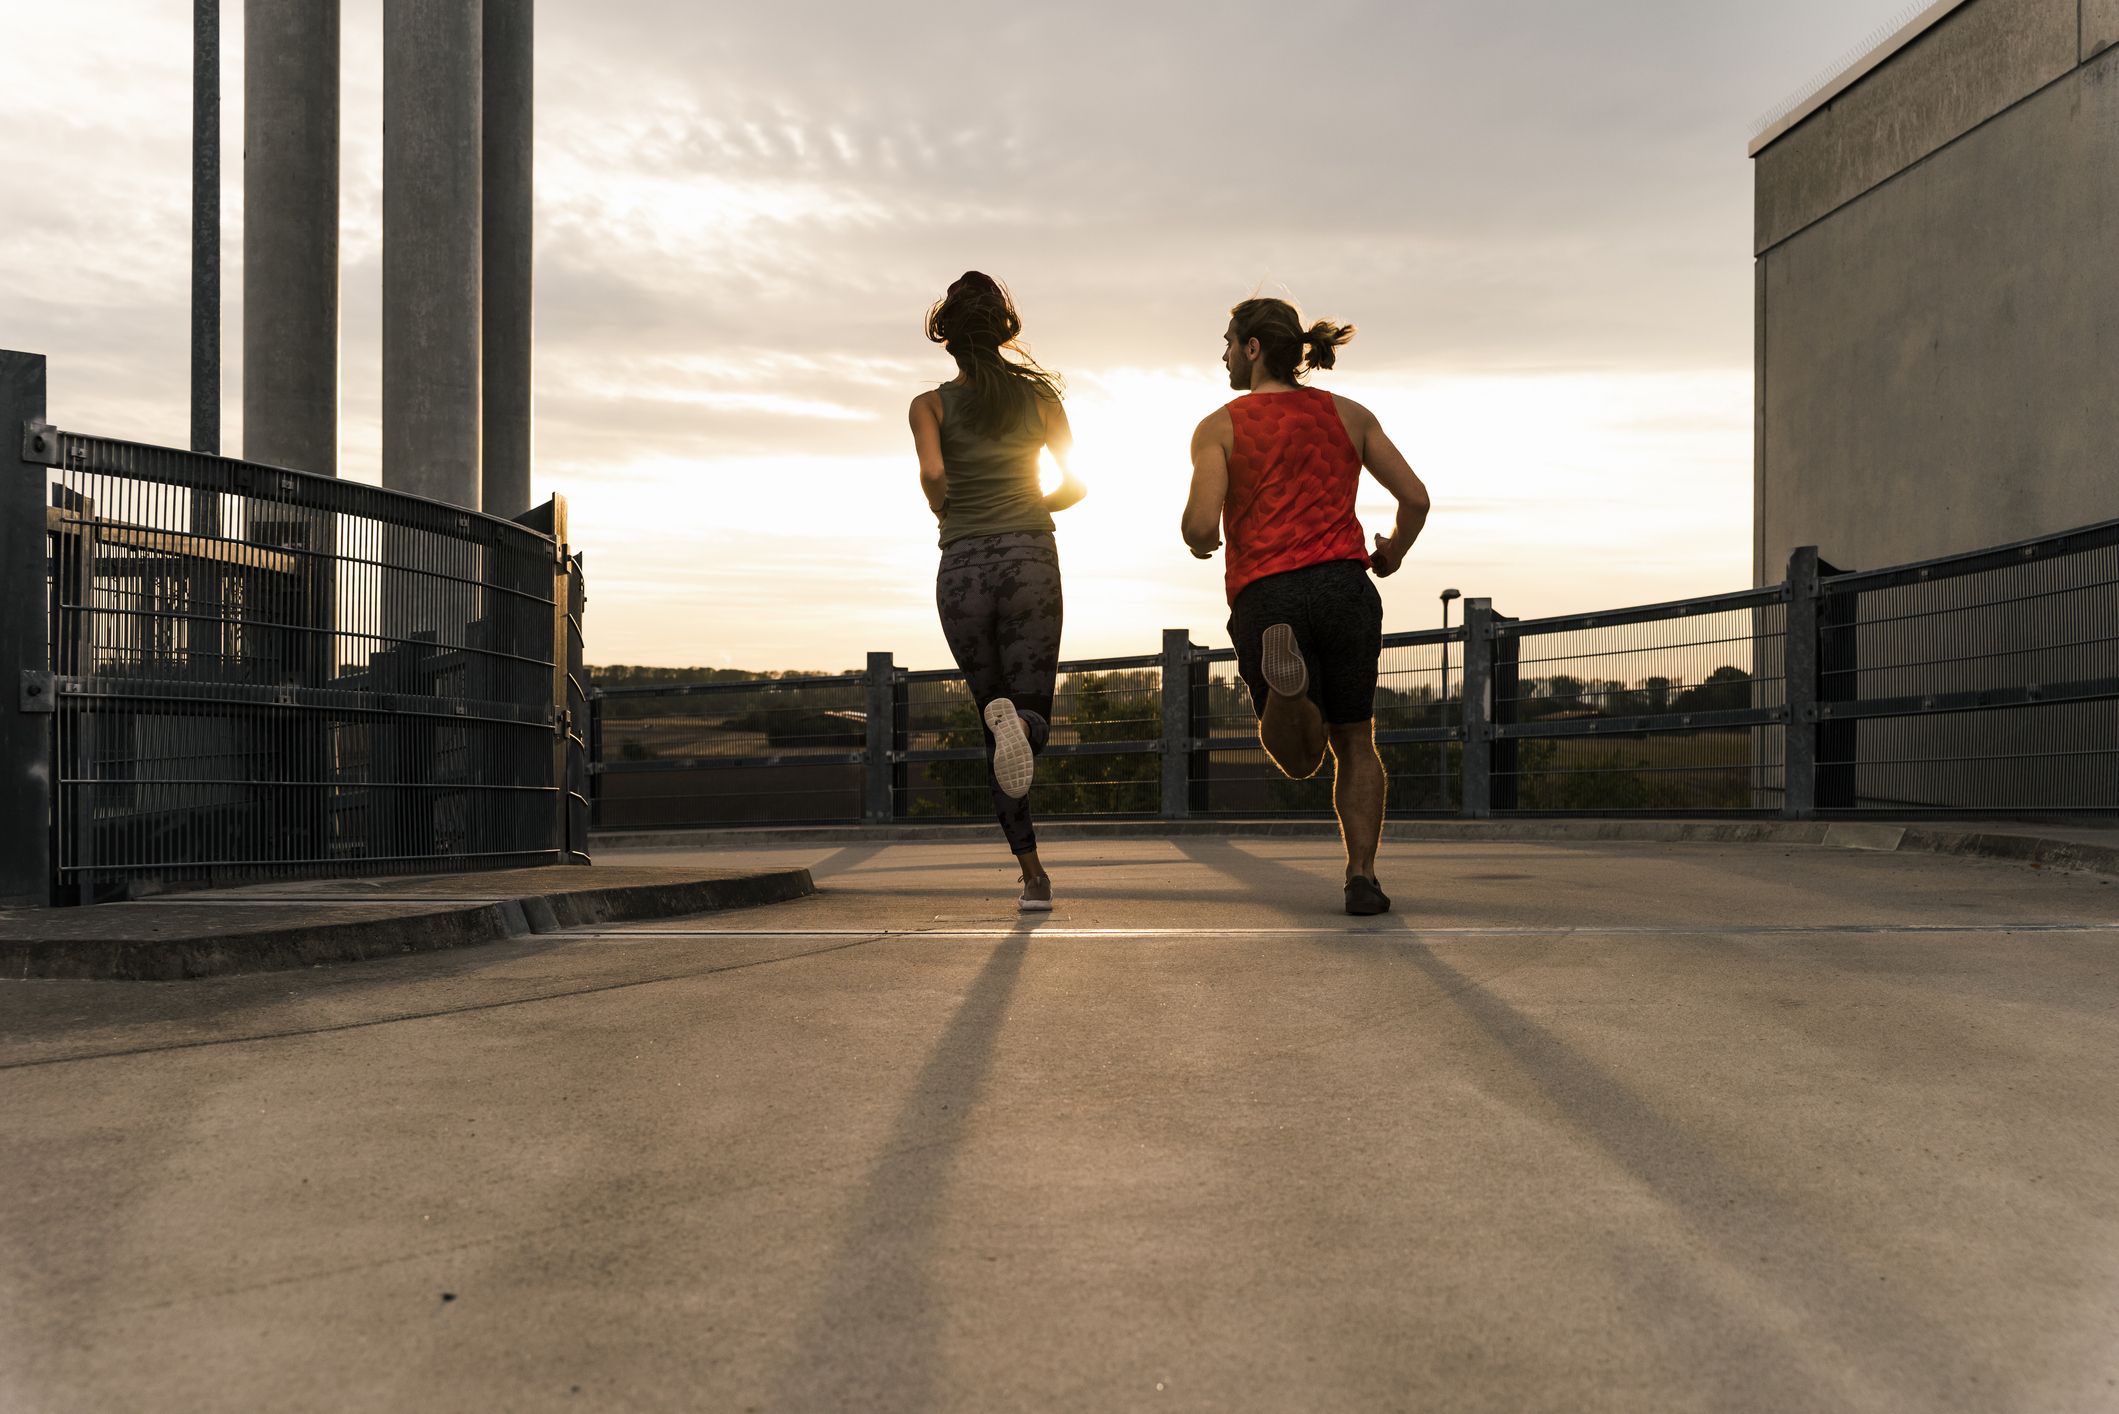 How to Run Faster by Adding Speed Work to Your Workouts